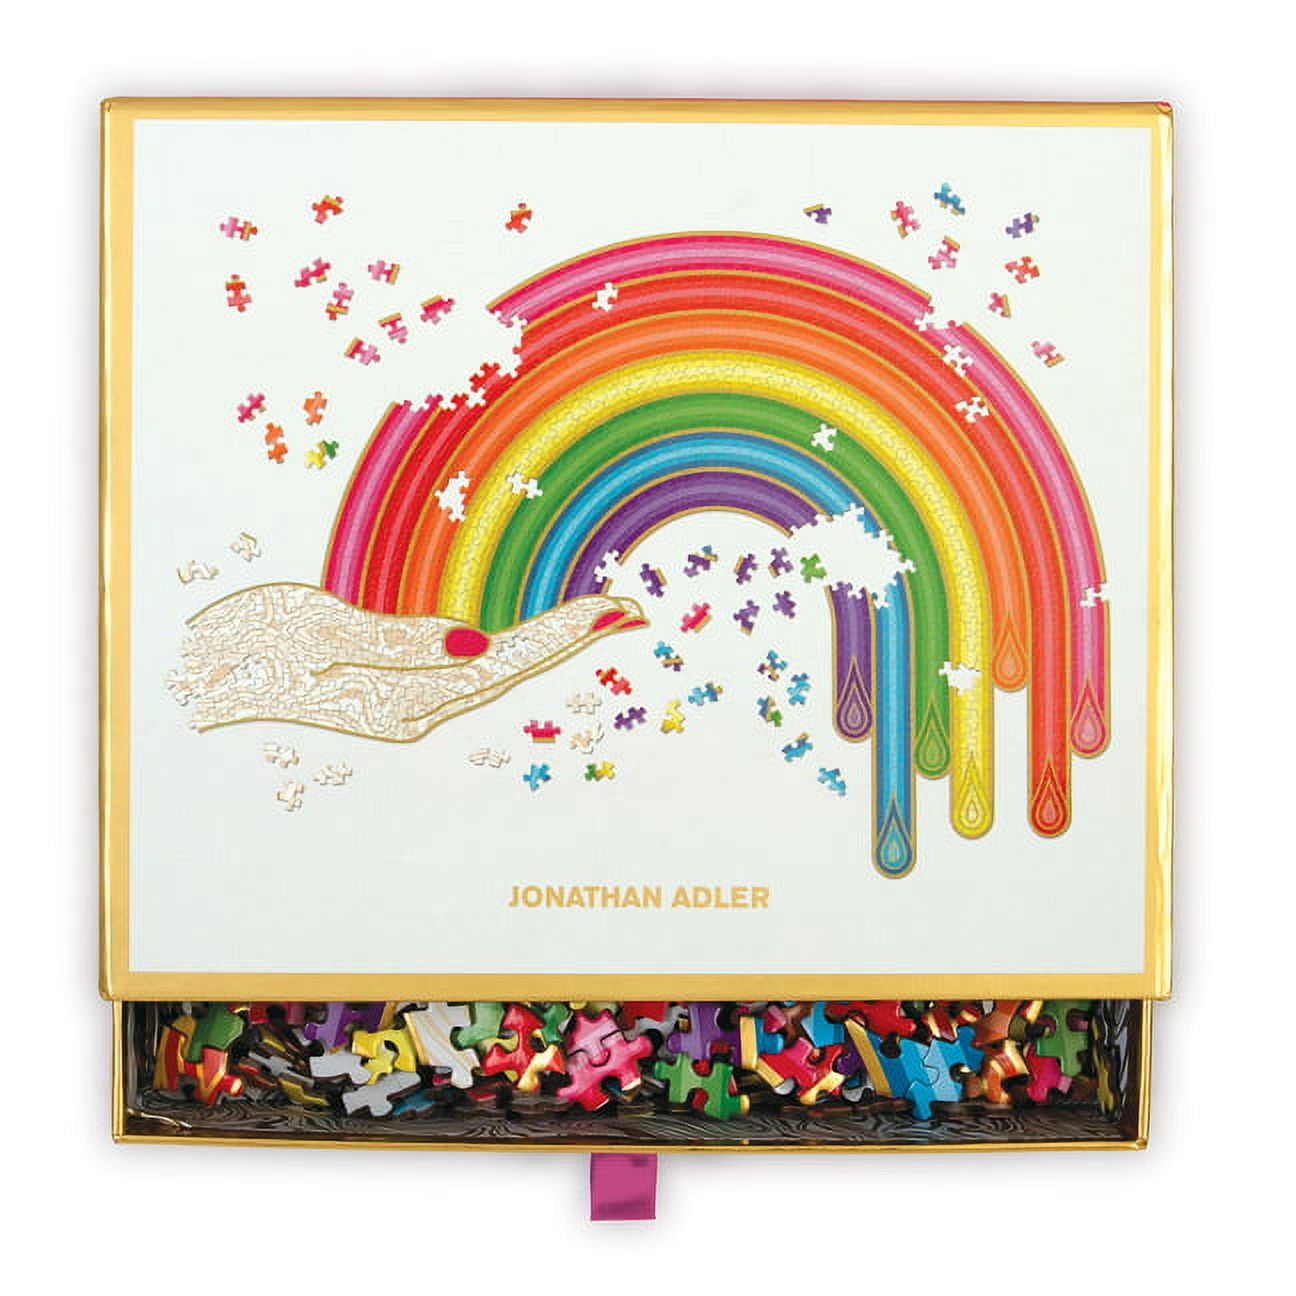 Jonathan Adler Rainbow Hand 750 Piece Shaped Puzzle (Other) - image 1 of 4